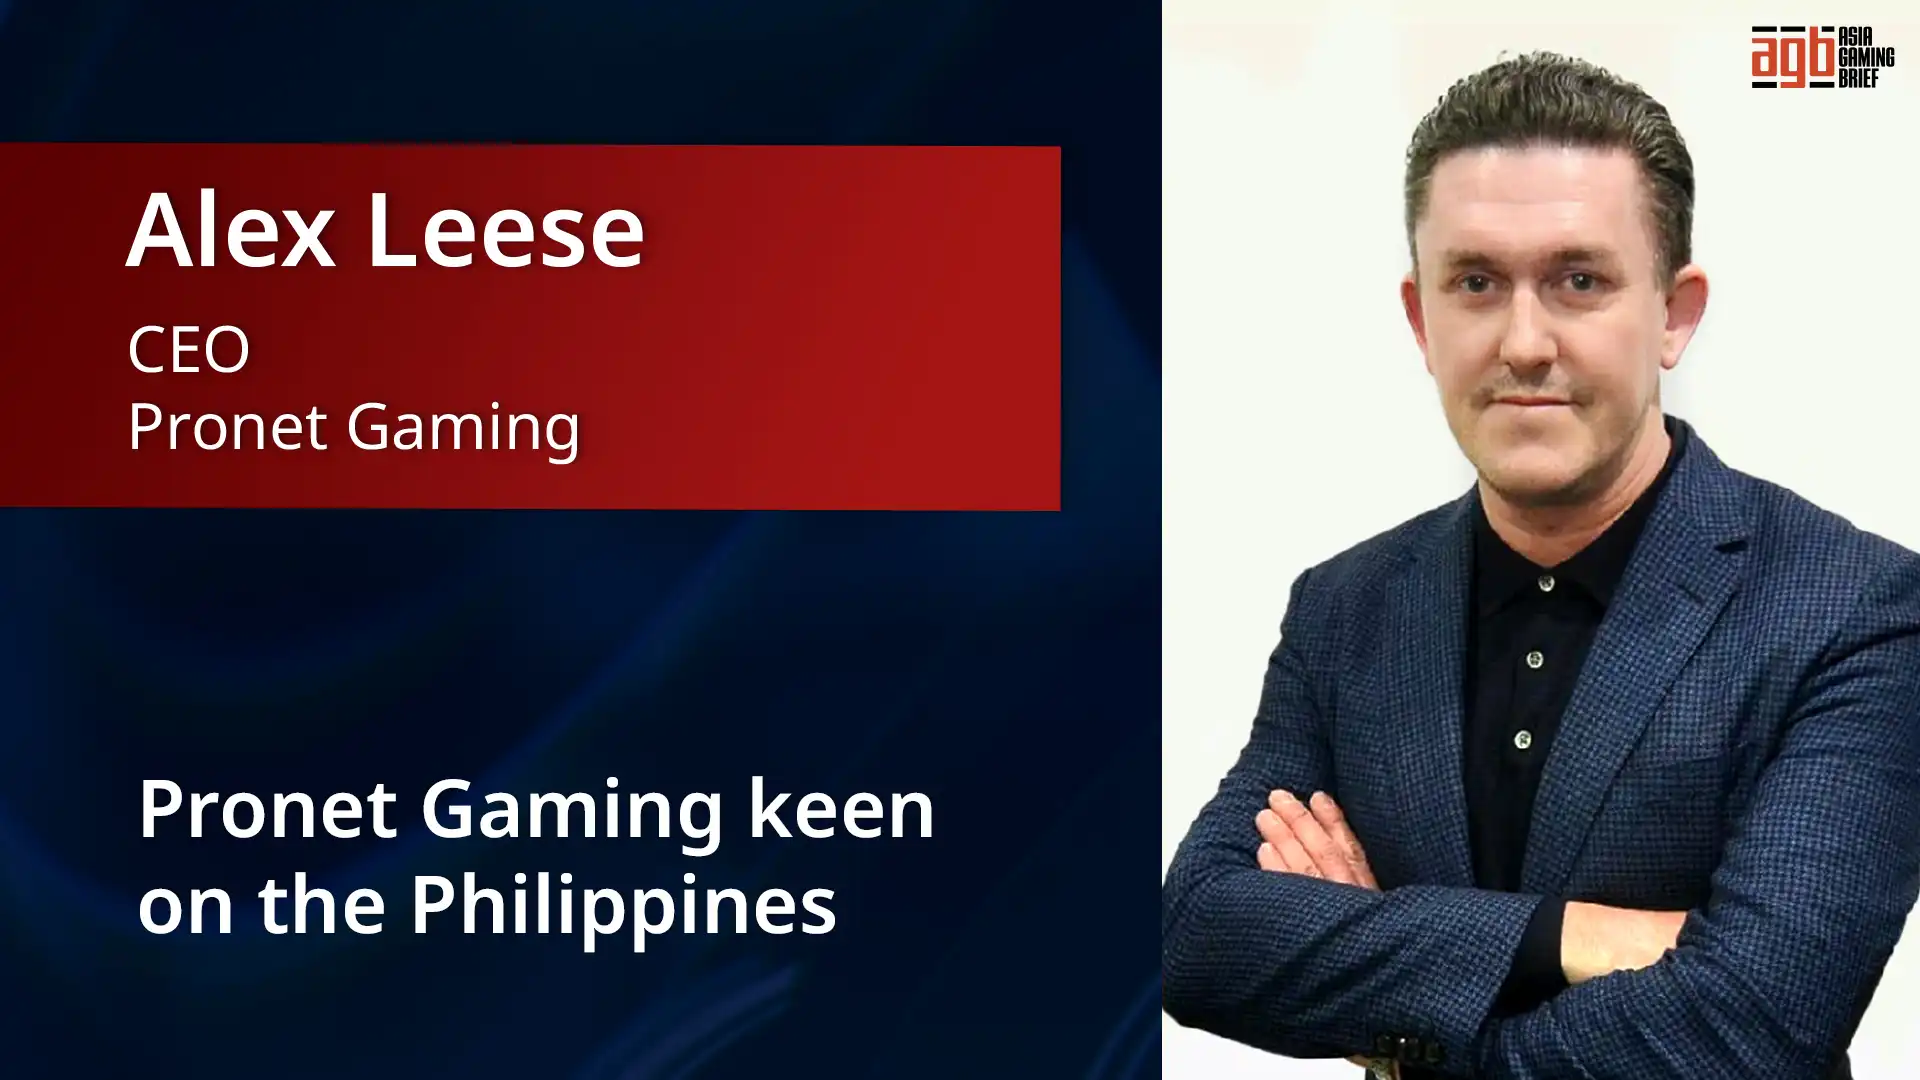 Pronet Gaming aims for Asian expansion, as it leverages the benefits of the ASEAN Gaming Summit